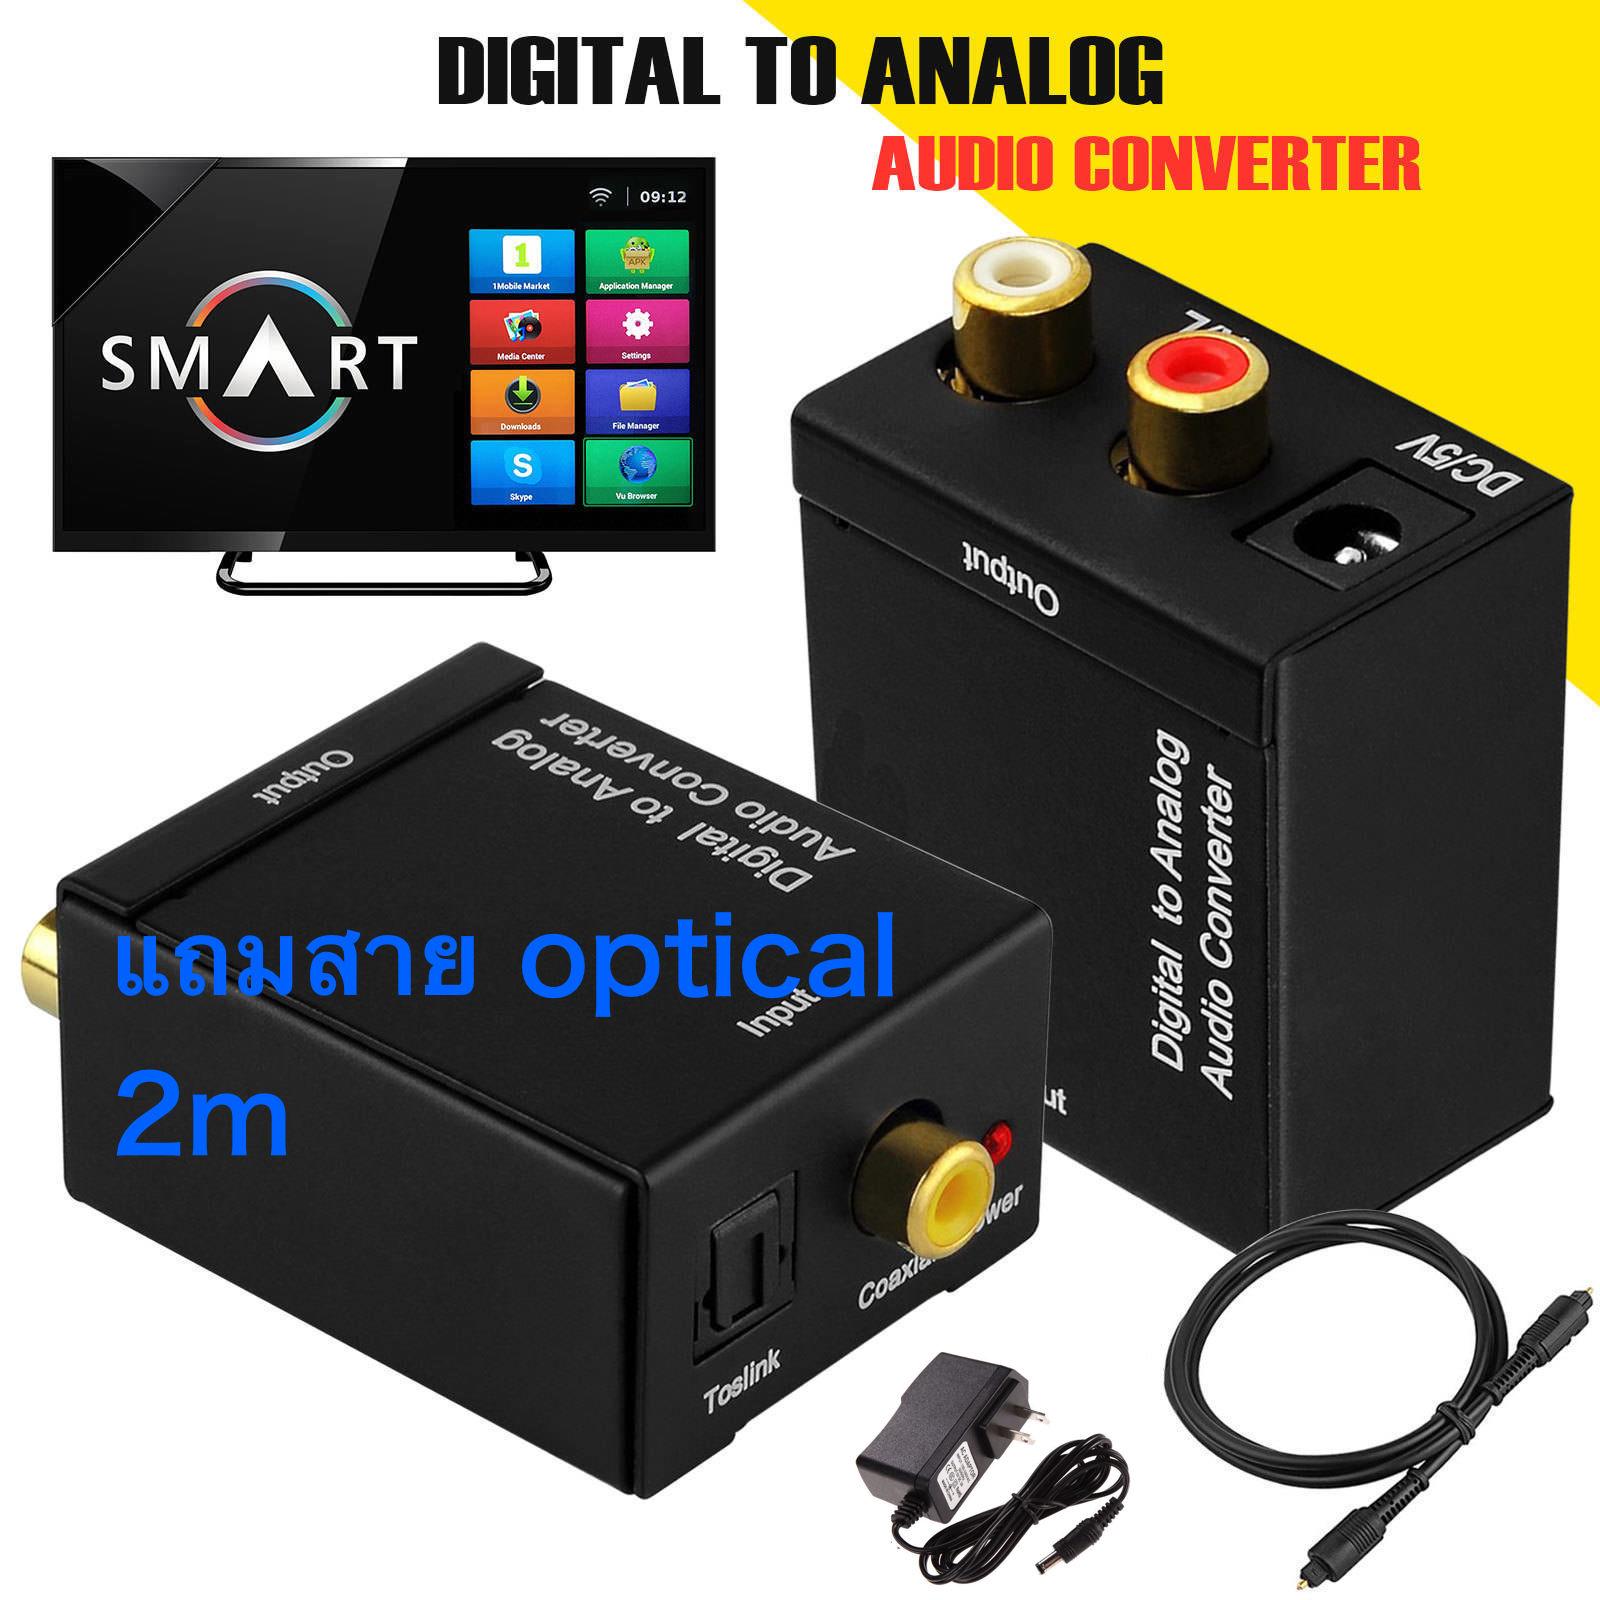 Digital Optical Coaxial Signal to Analog Audio Converter Adapter RCA Free optical cable  2m 1pcs